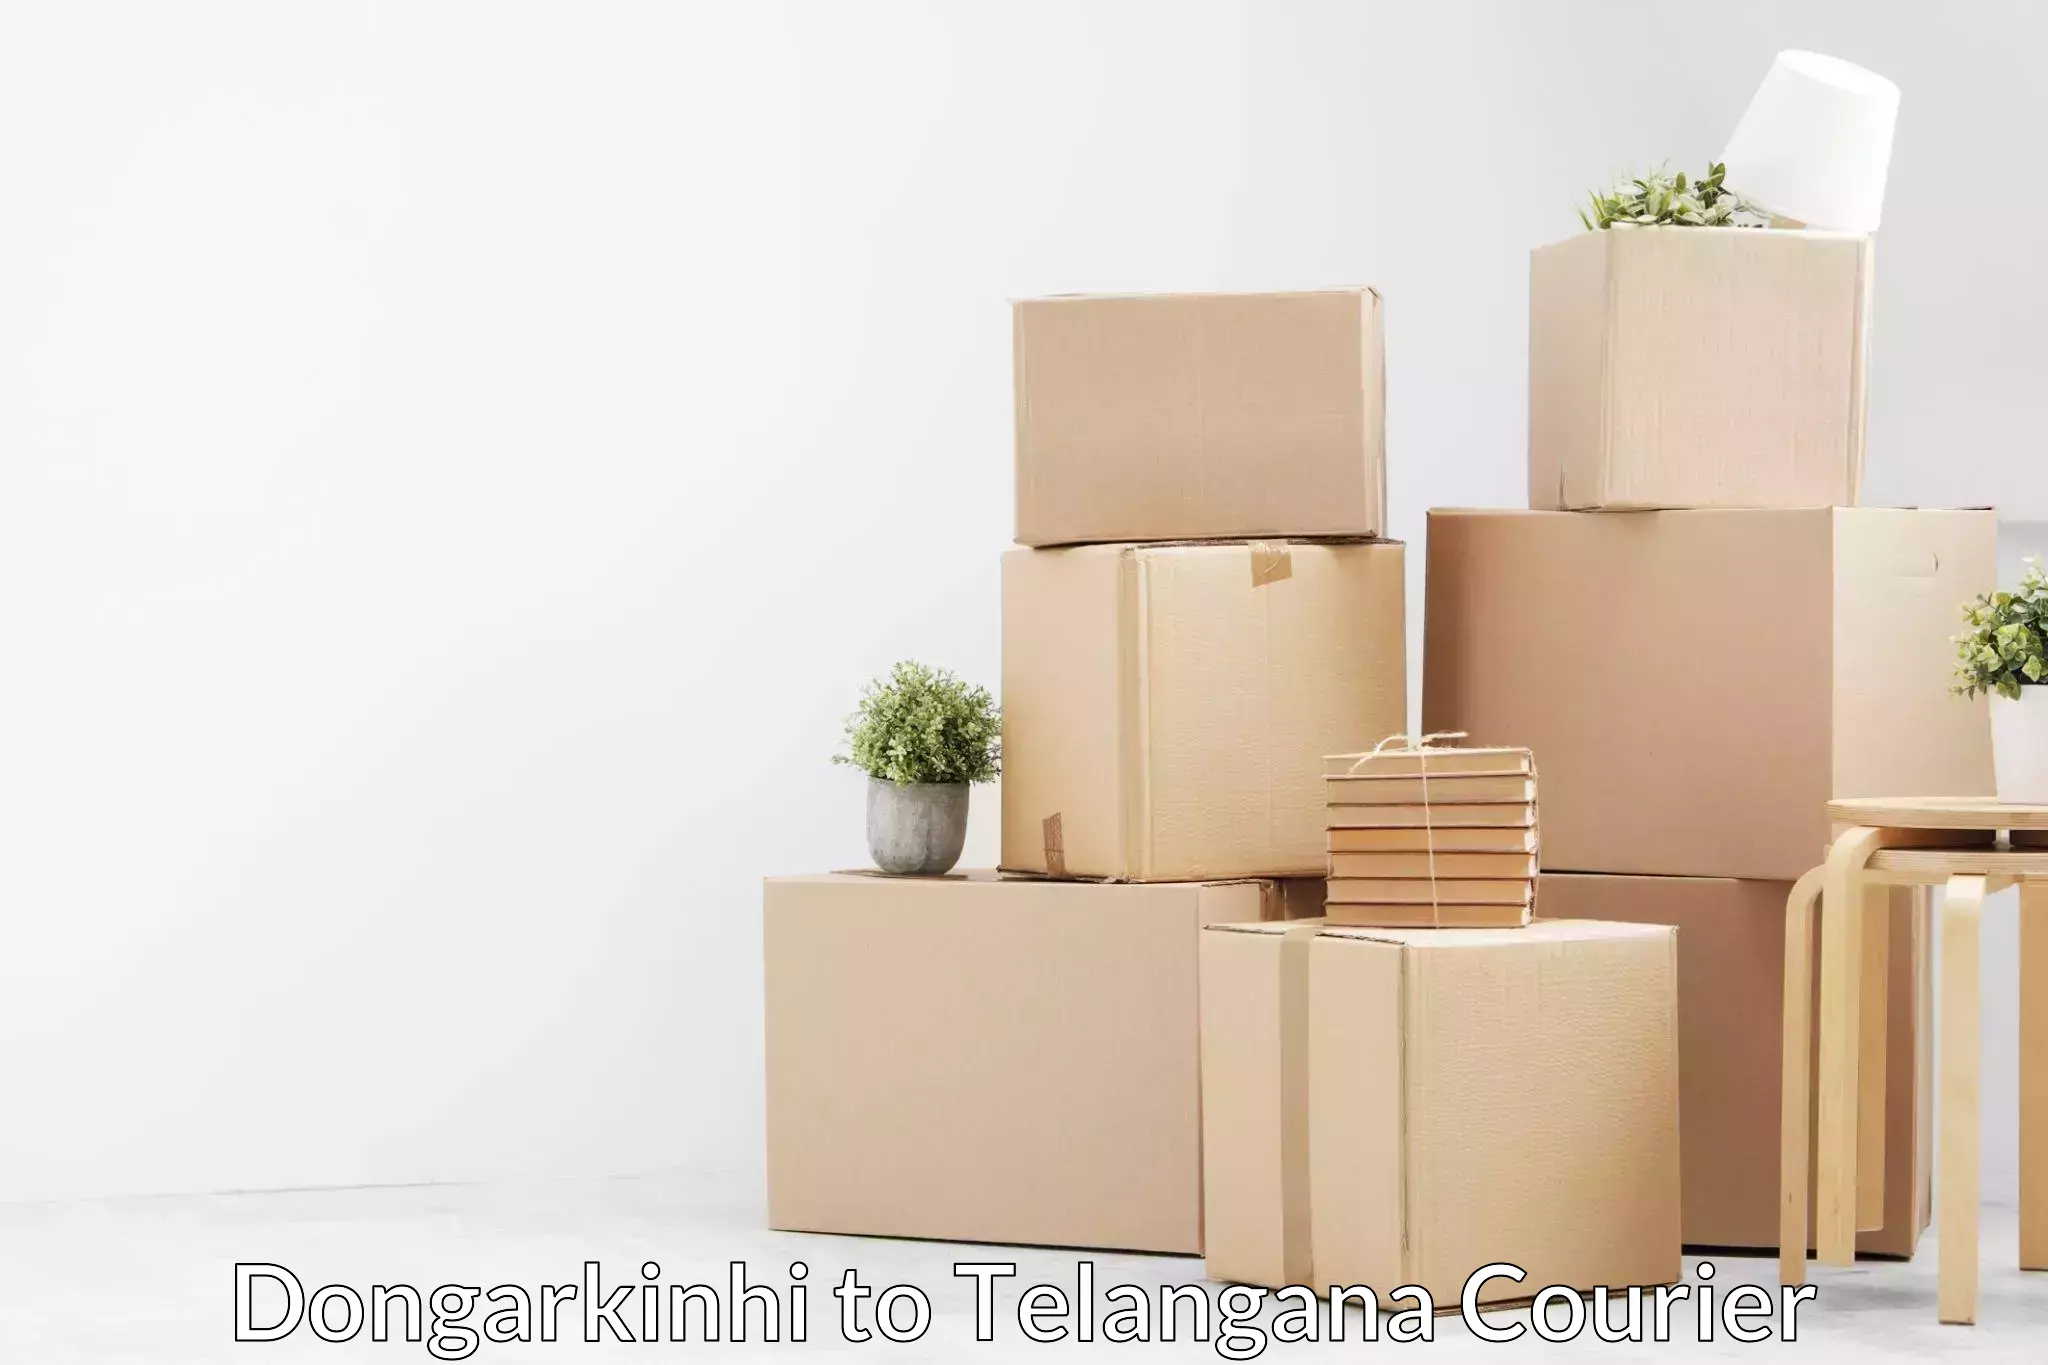 Advanced relocation solutions in Dongarkinhi to Telangana